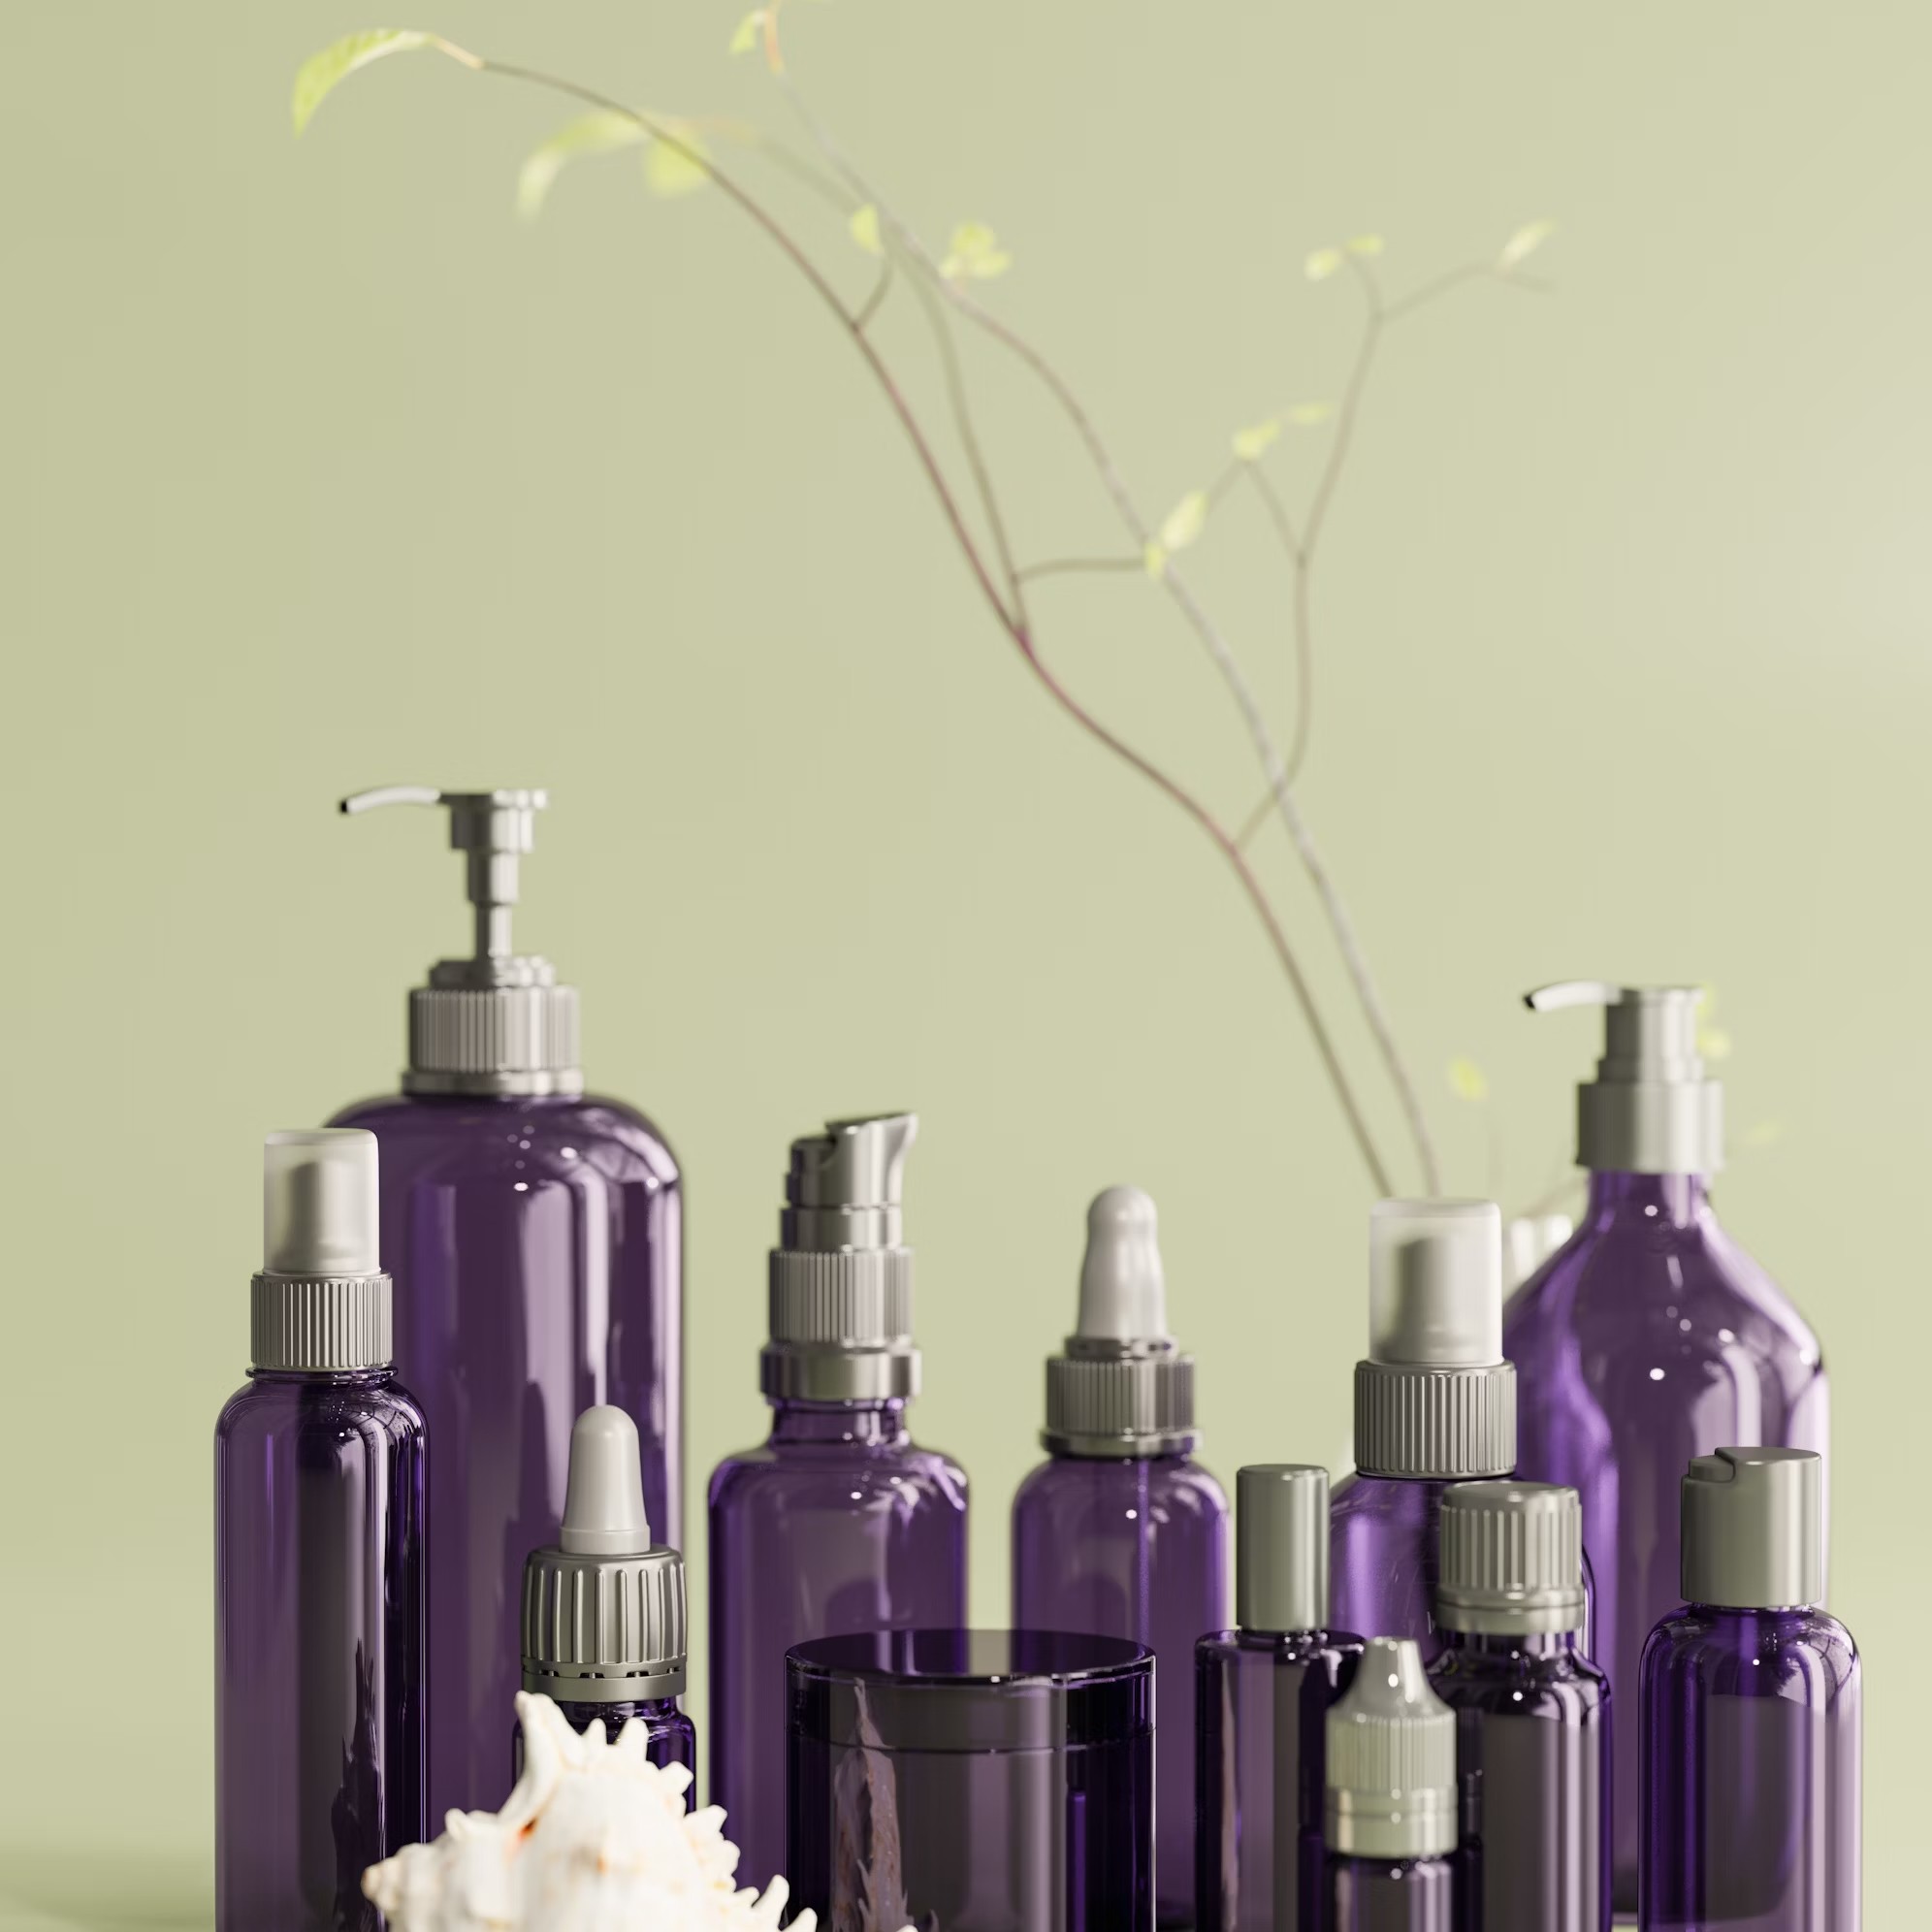 A group of purple bottles sitting on top of a table photo – Free Render Image on Unsplash